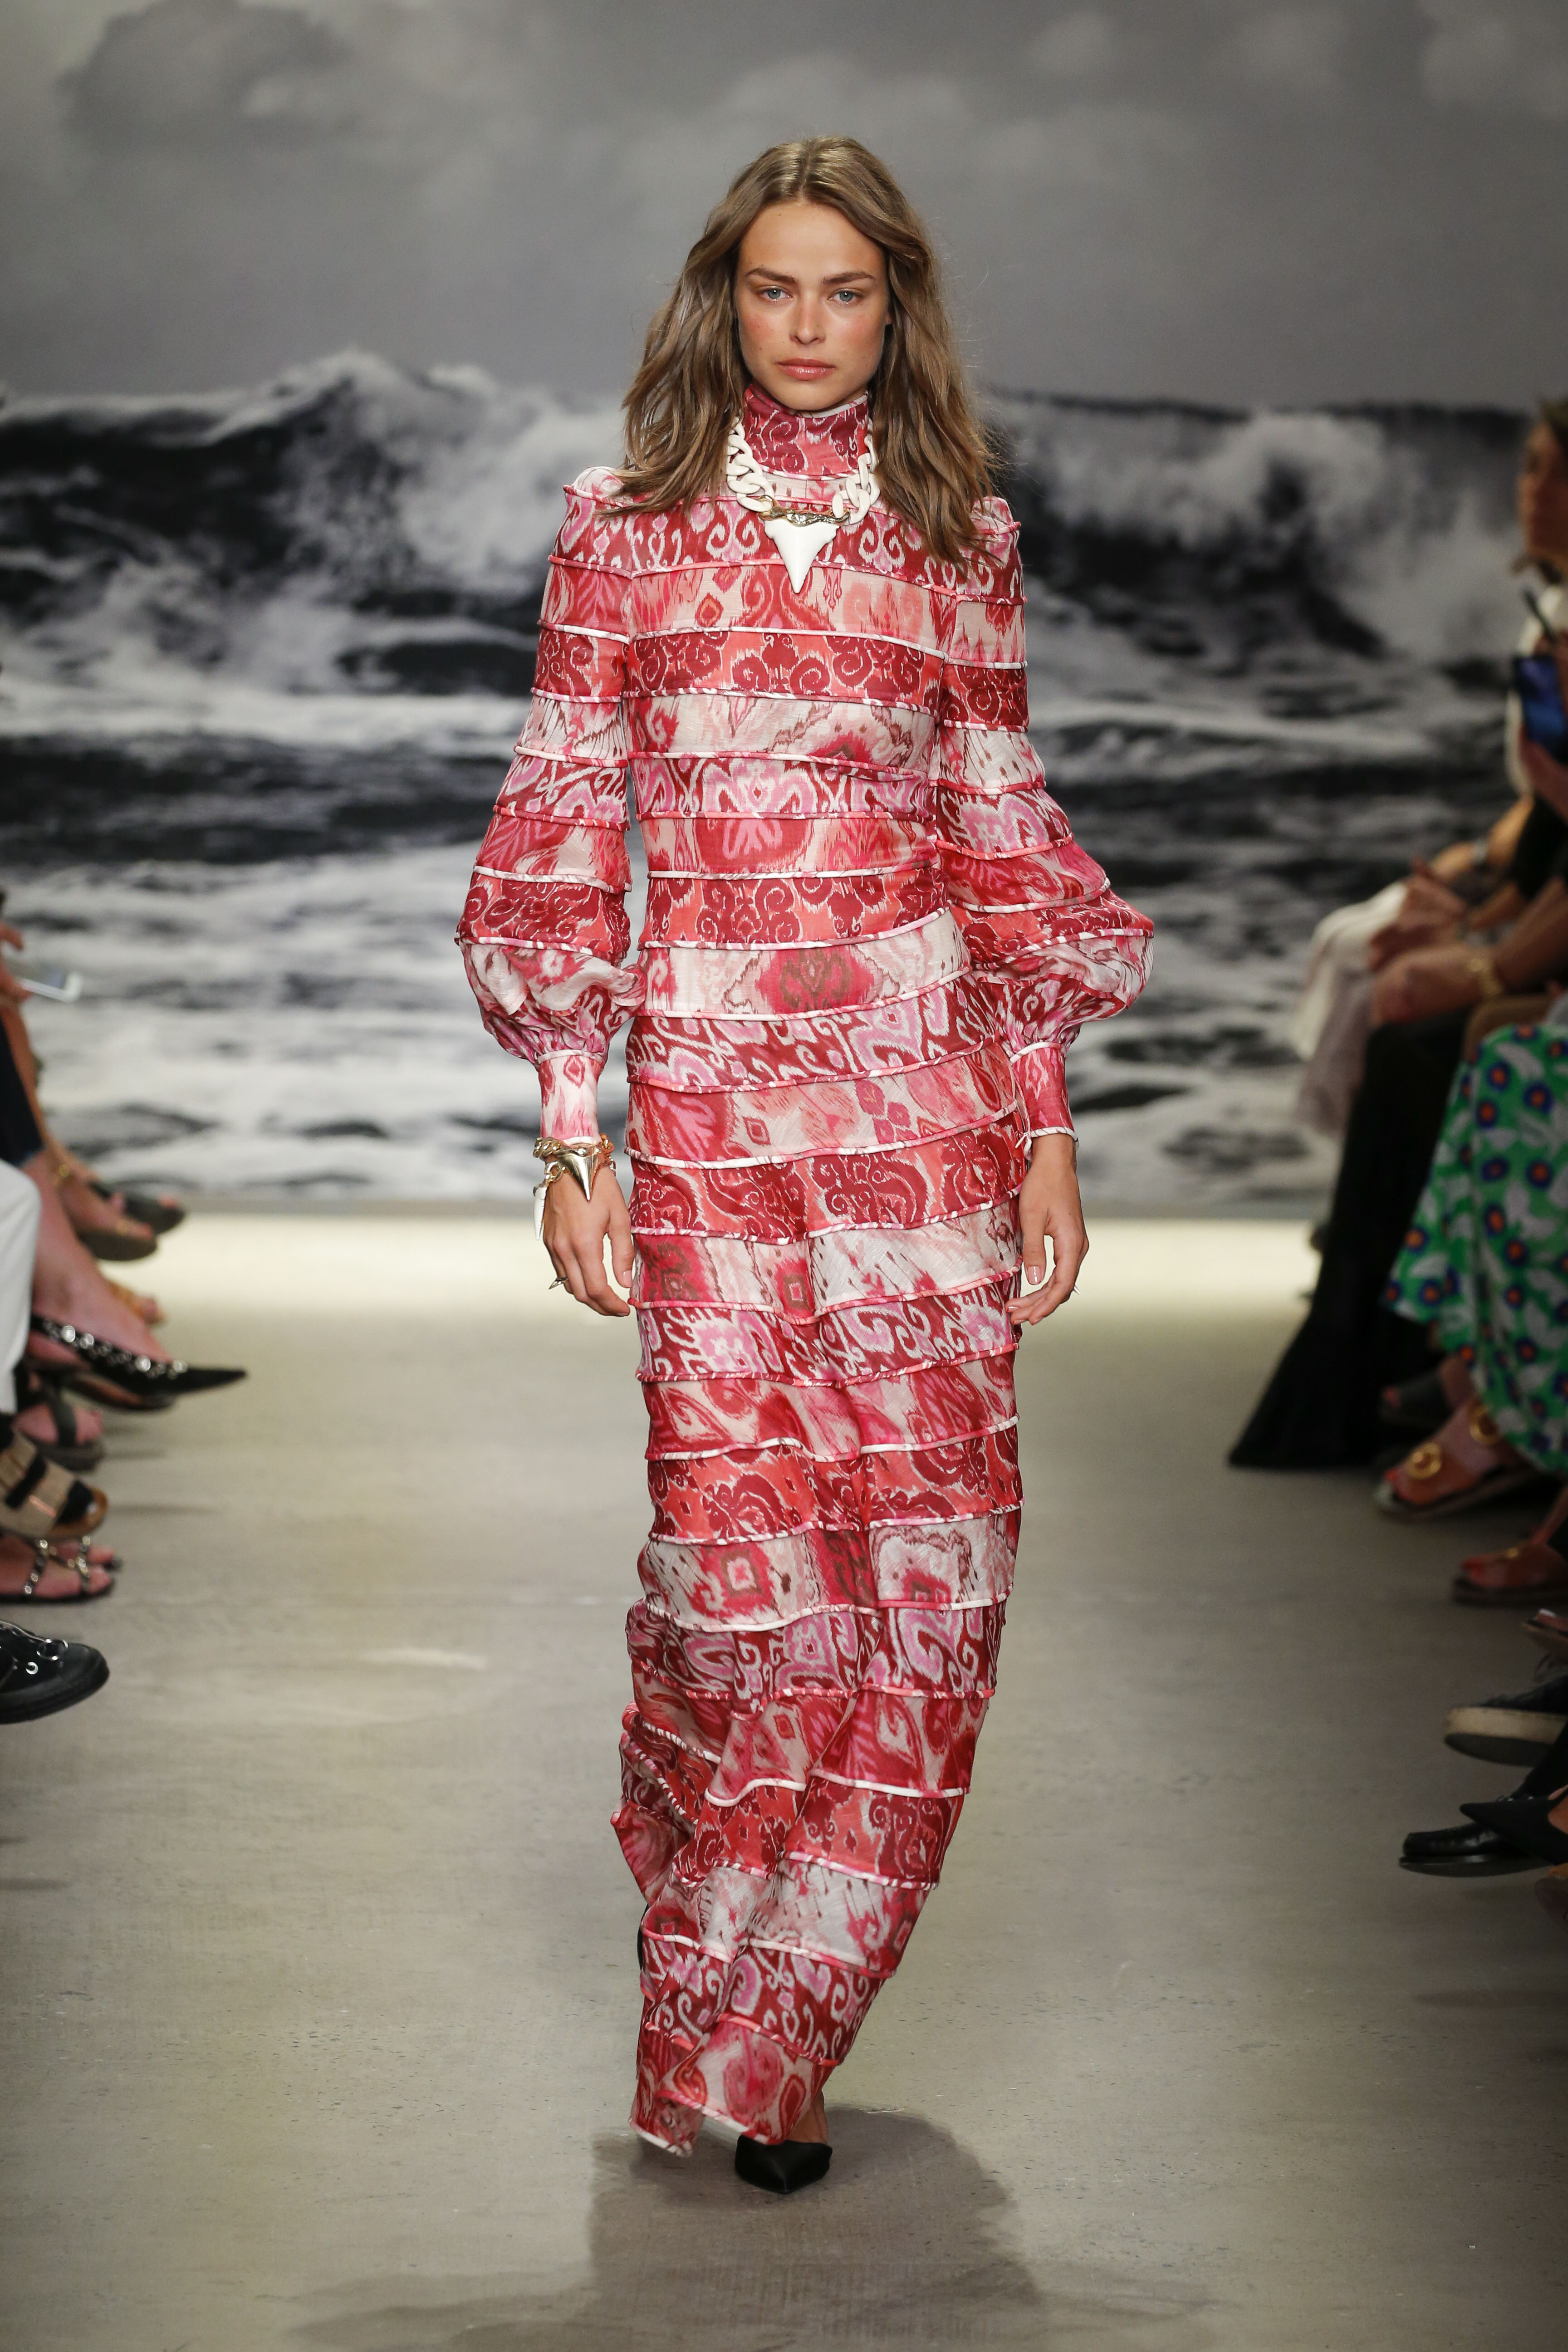 NYFW: Zimmermann Harks Back To The Days Of The Old School Yard - Grazia